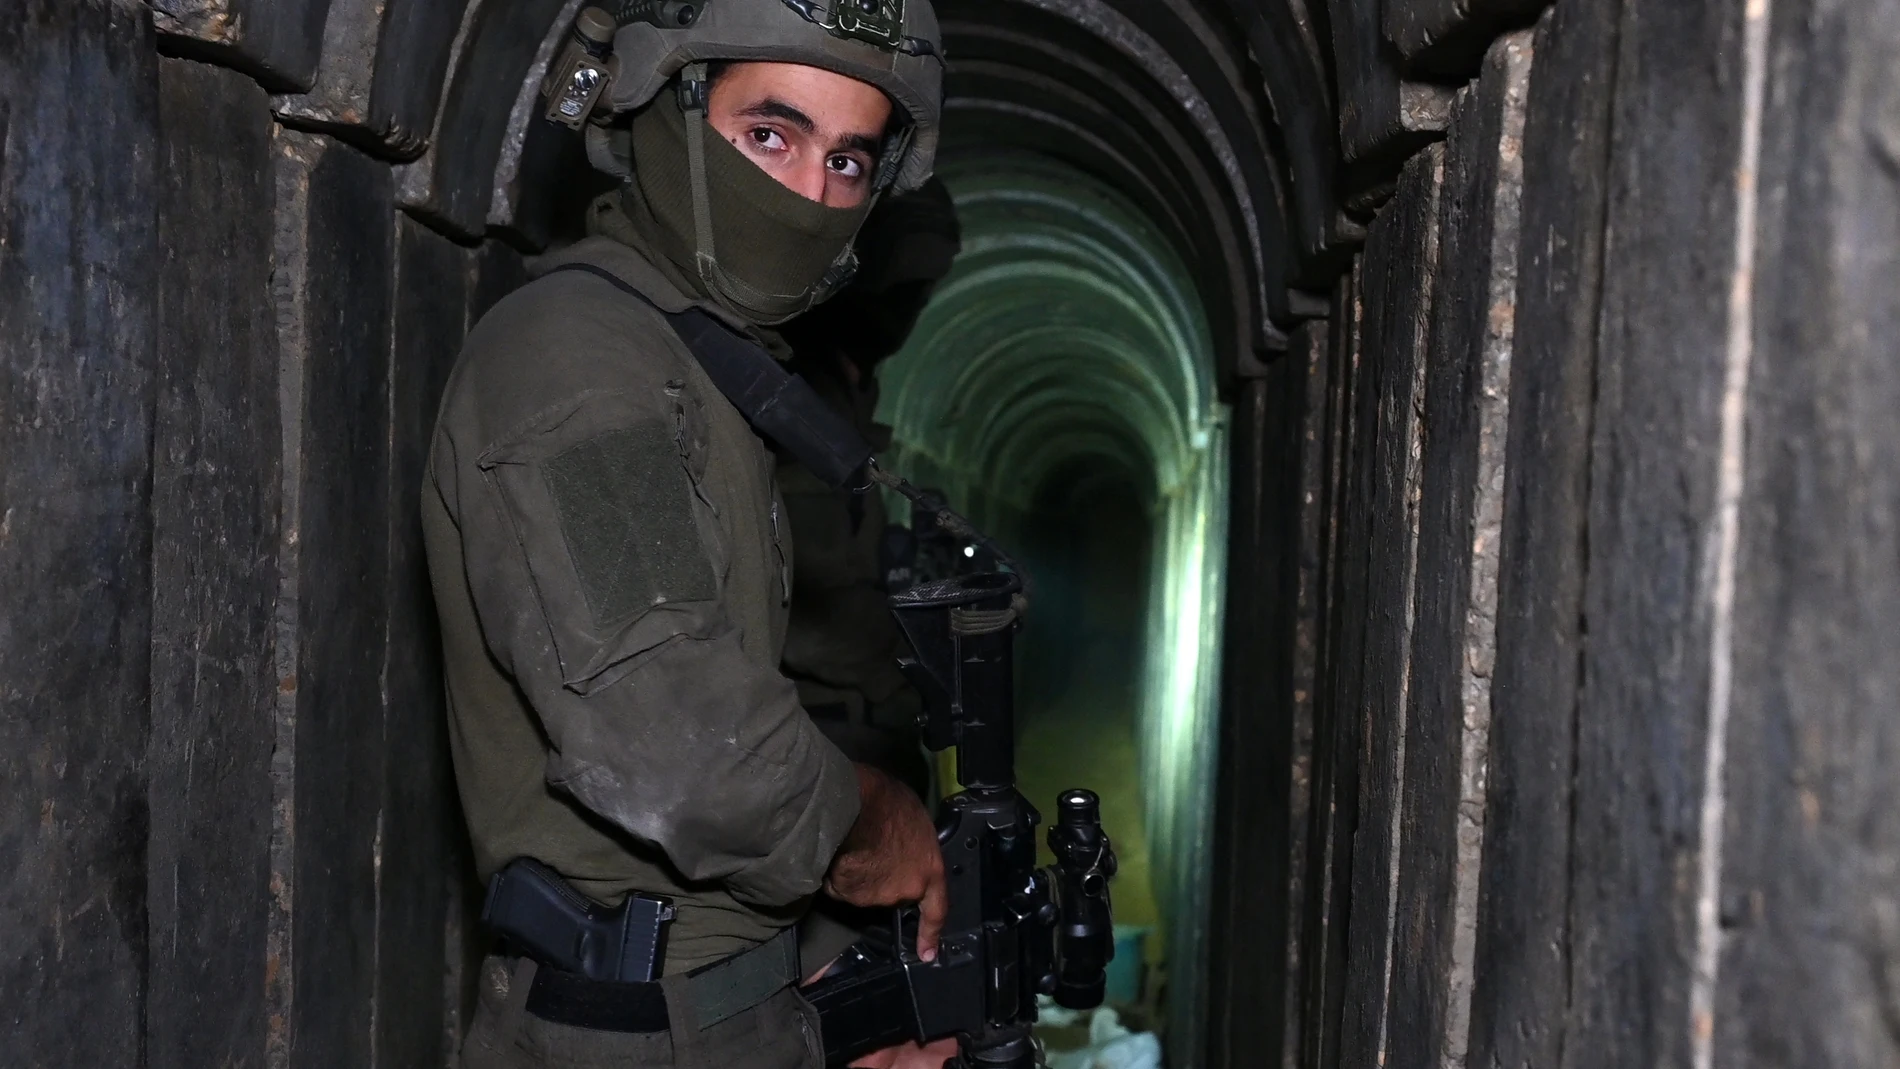 A soldier stands in what the Israeli army says is a tunnel dug by Hamas militants inside the Al-Shifa hospital complex in Gaza City in the northern Gaza Strip, amid continuing battles between Israel and the Palestinian militant group Hamas.